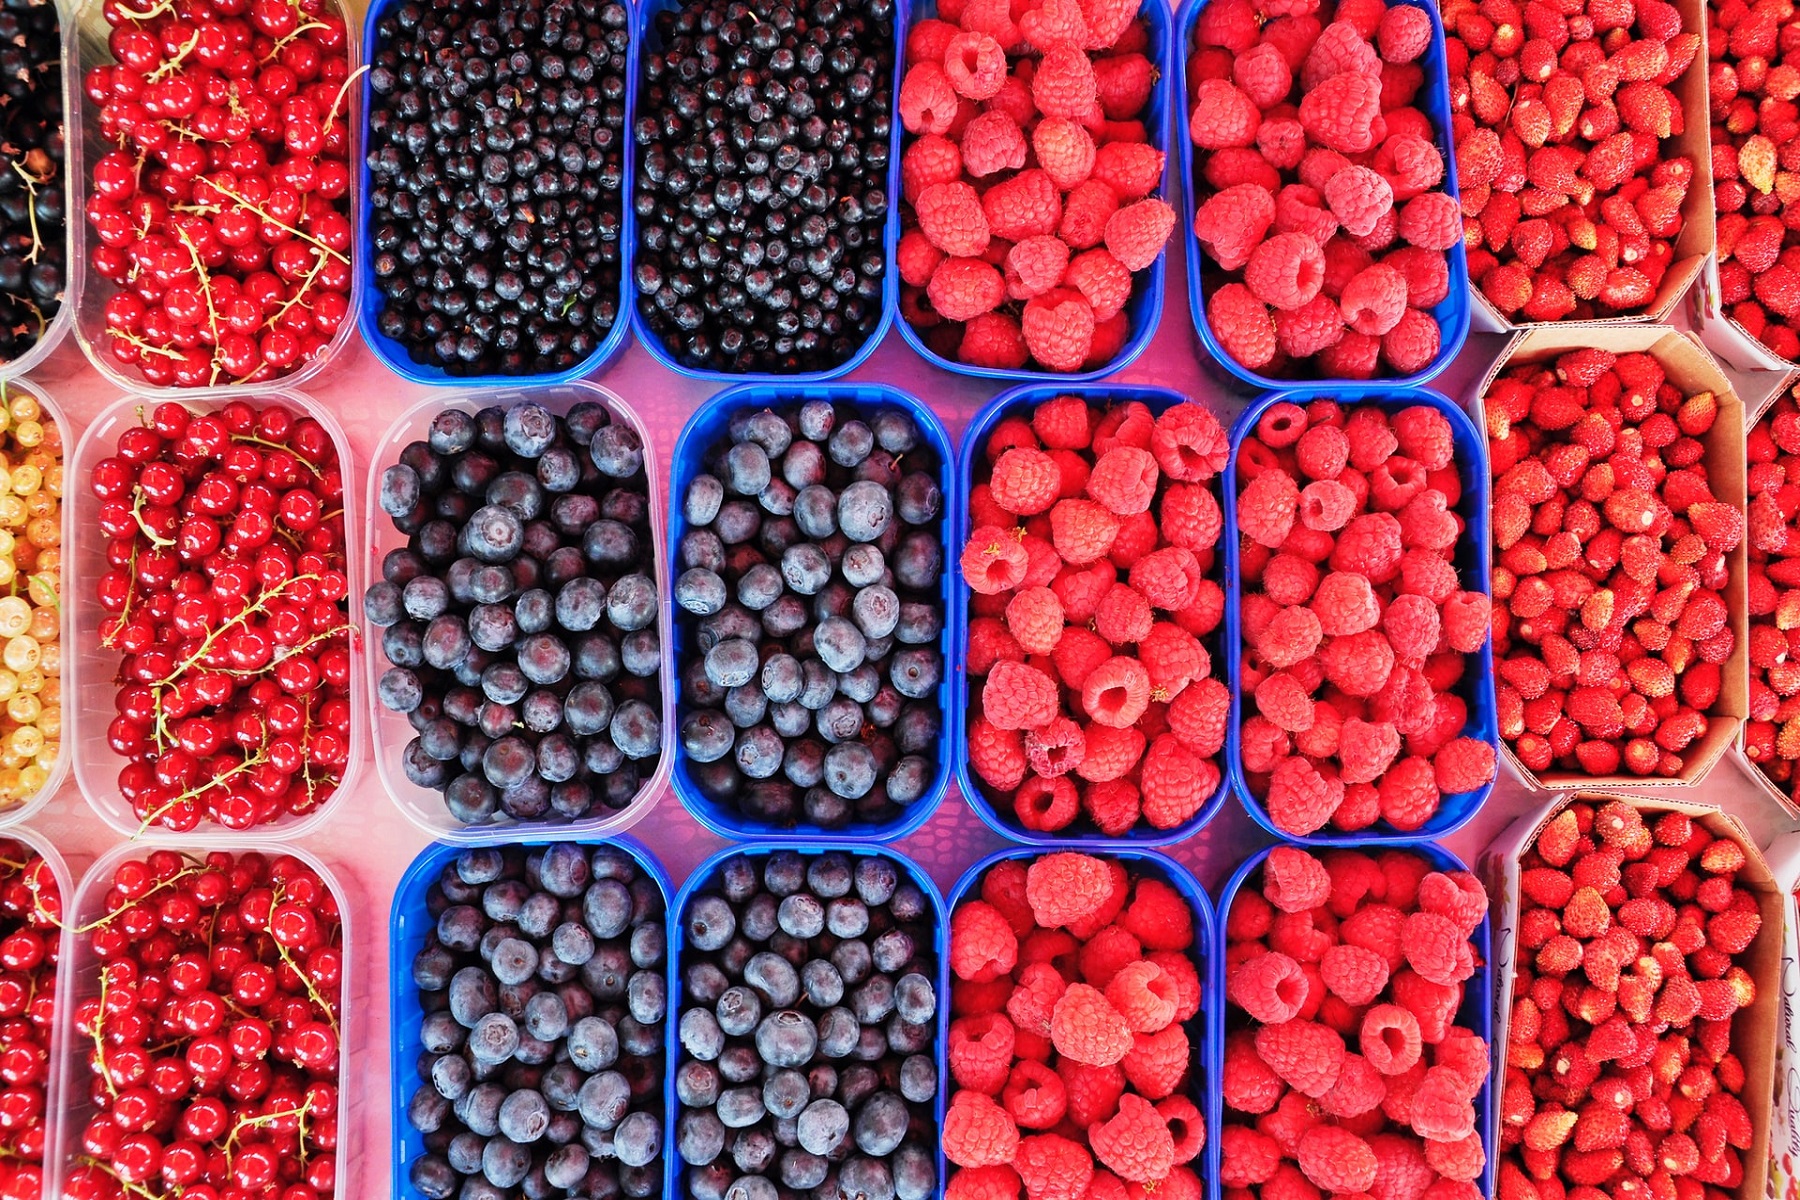 A flatlay of different berries in containers - raspberries, cherries, blueberries. All of these are core foods in a vegan diet. 